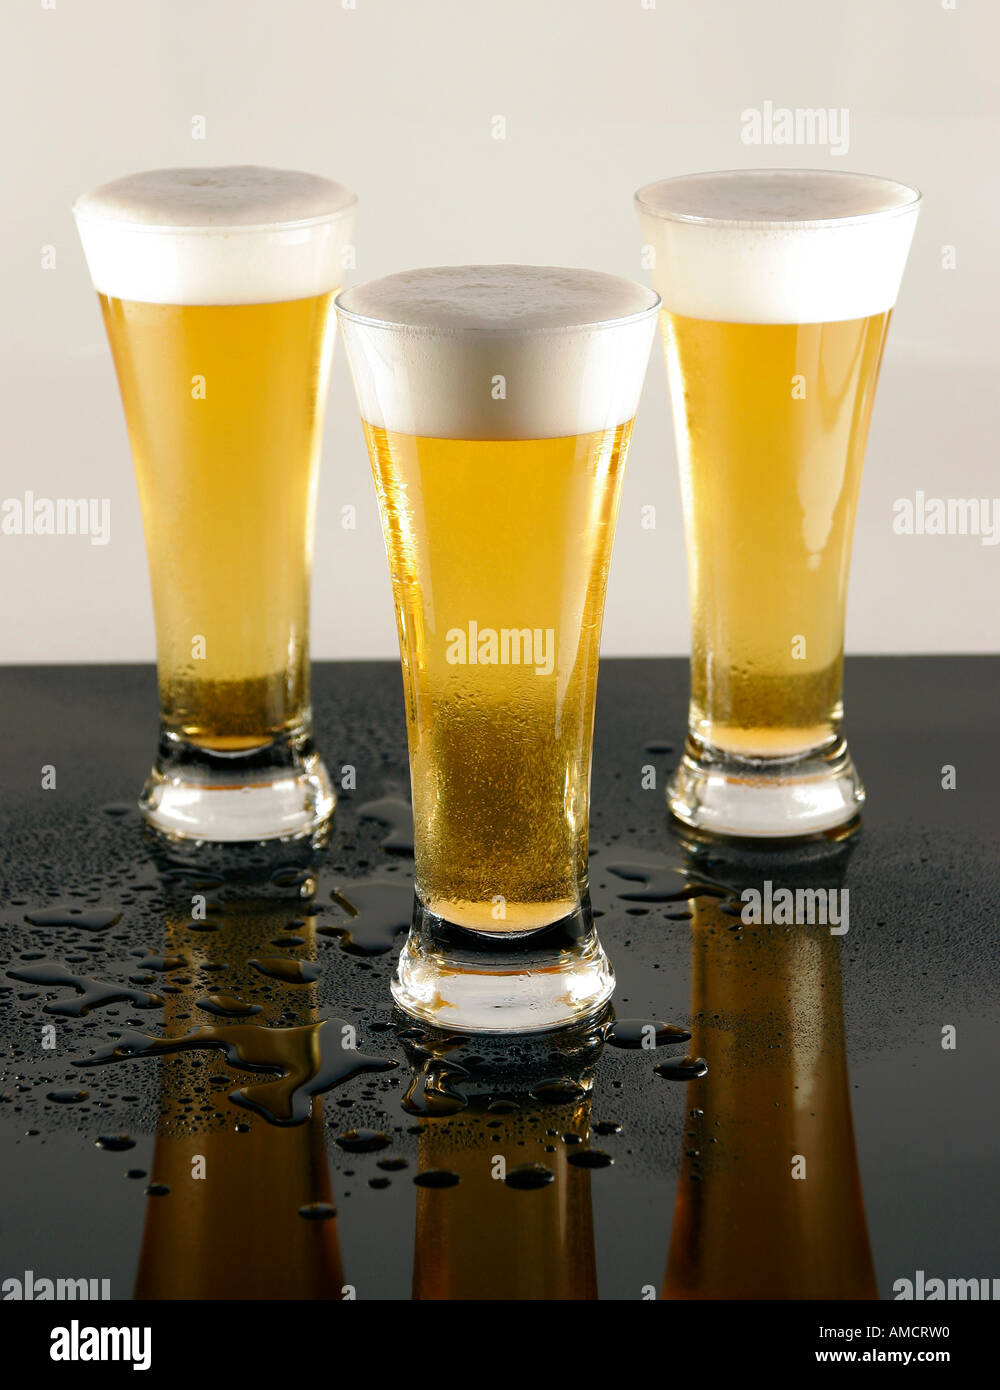 Three glasses of lager with foamy heads close up Stock Photo